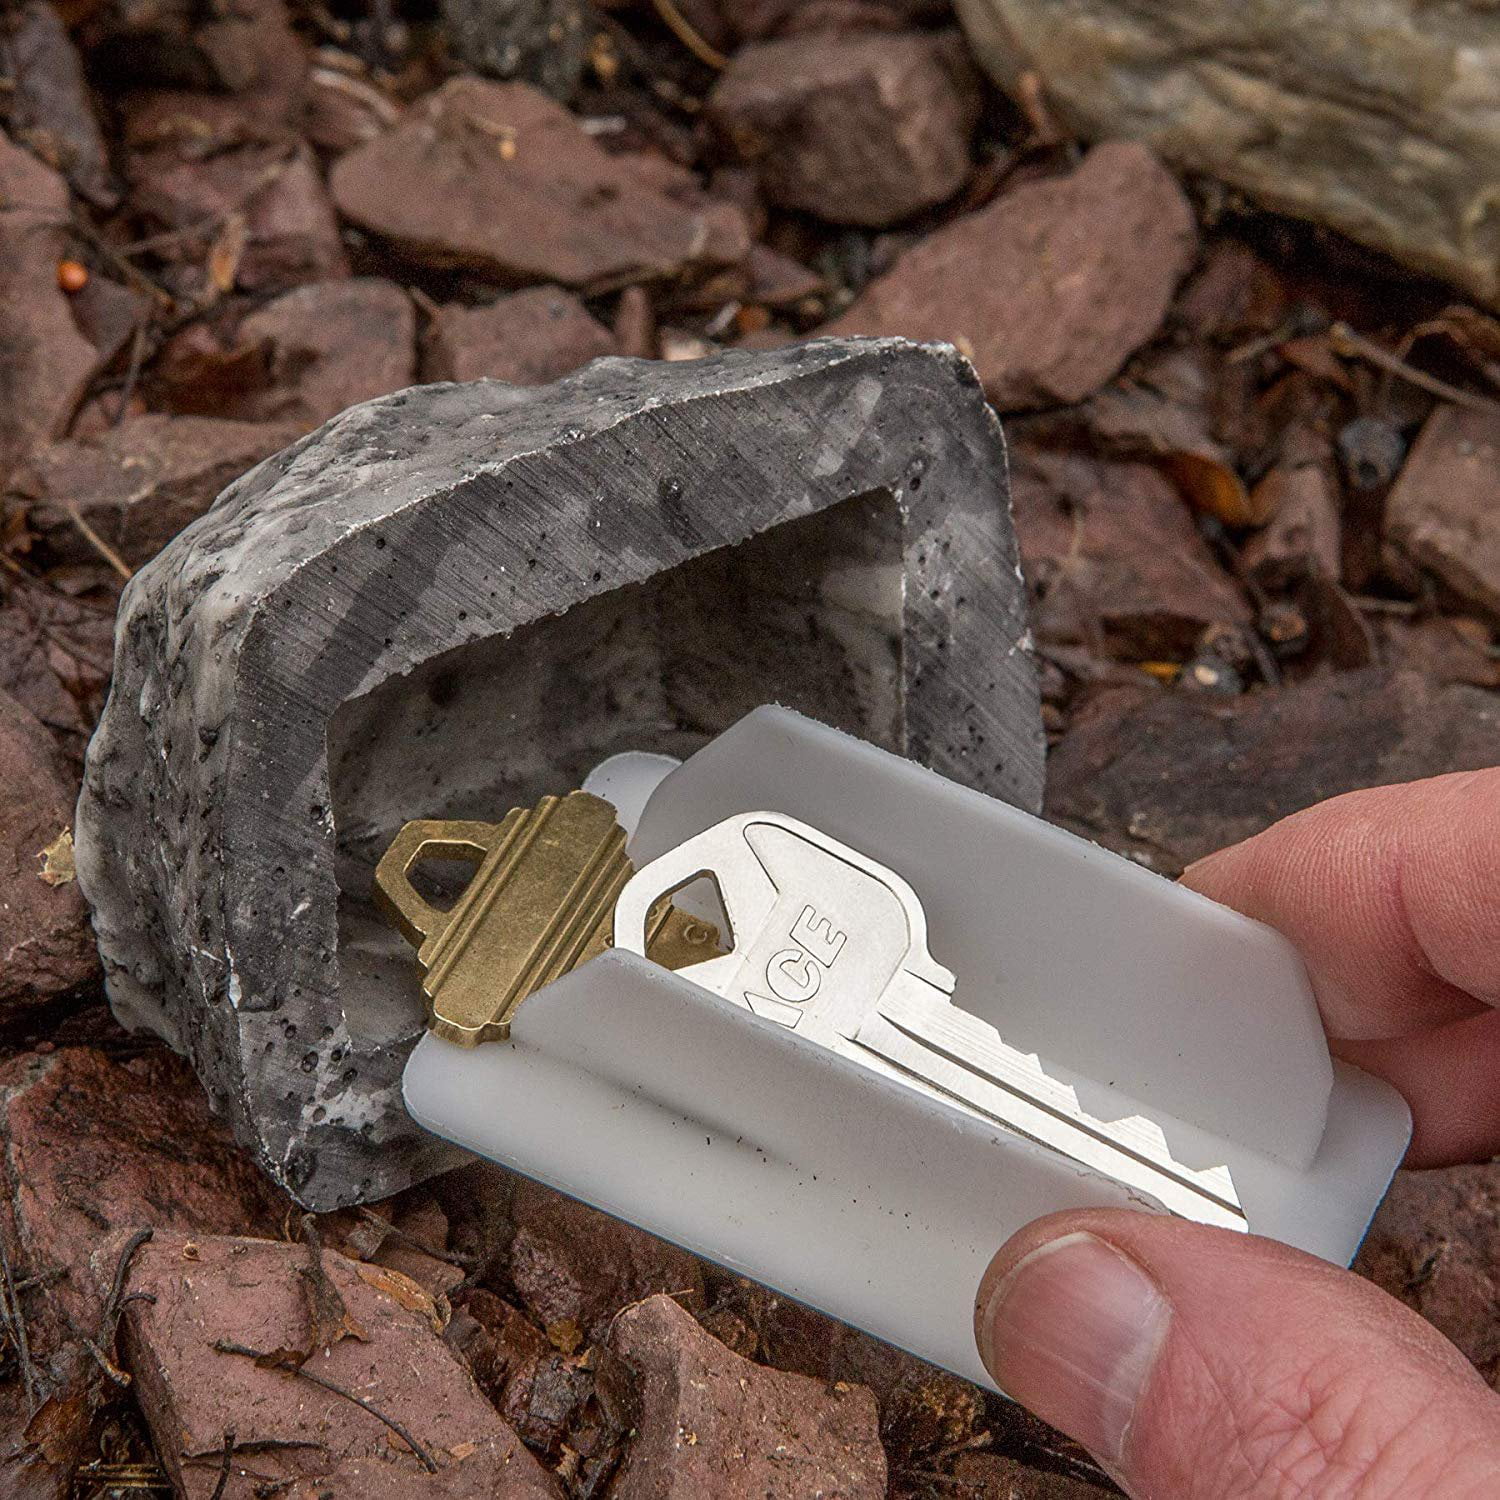 Fake Rock Key Hider,Flat Plastic Base Holder in Gray Color for Safe  Compartment of Spare Car Key, House Keys ,Home Improvement, Unique Gift